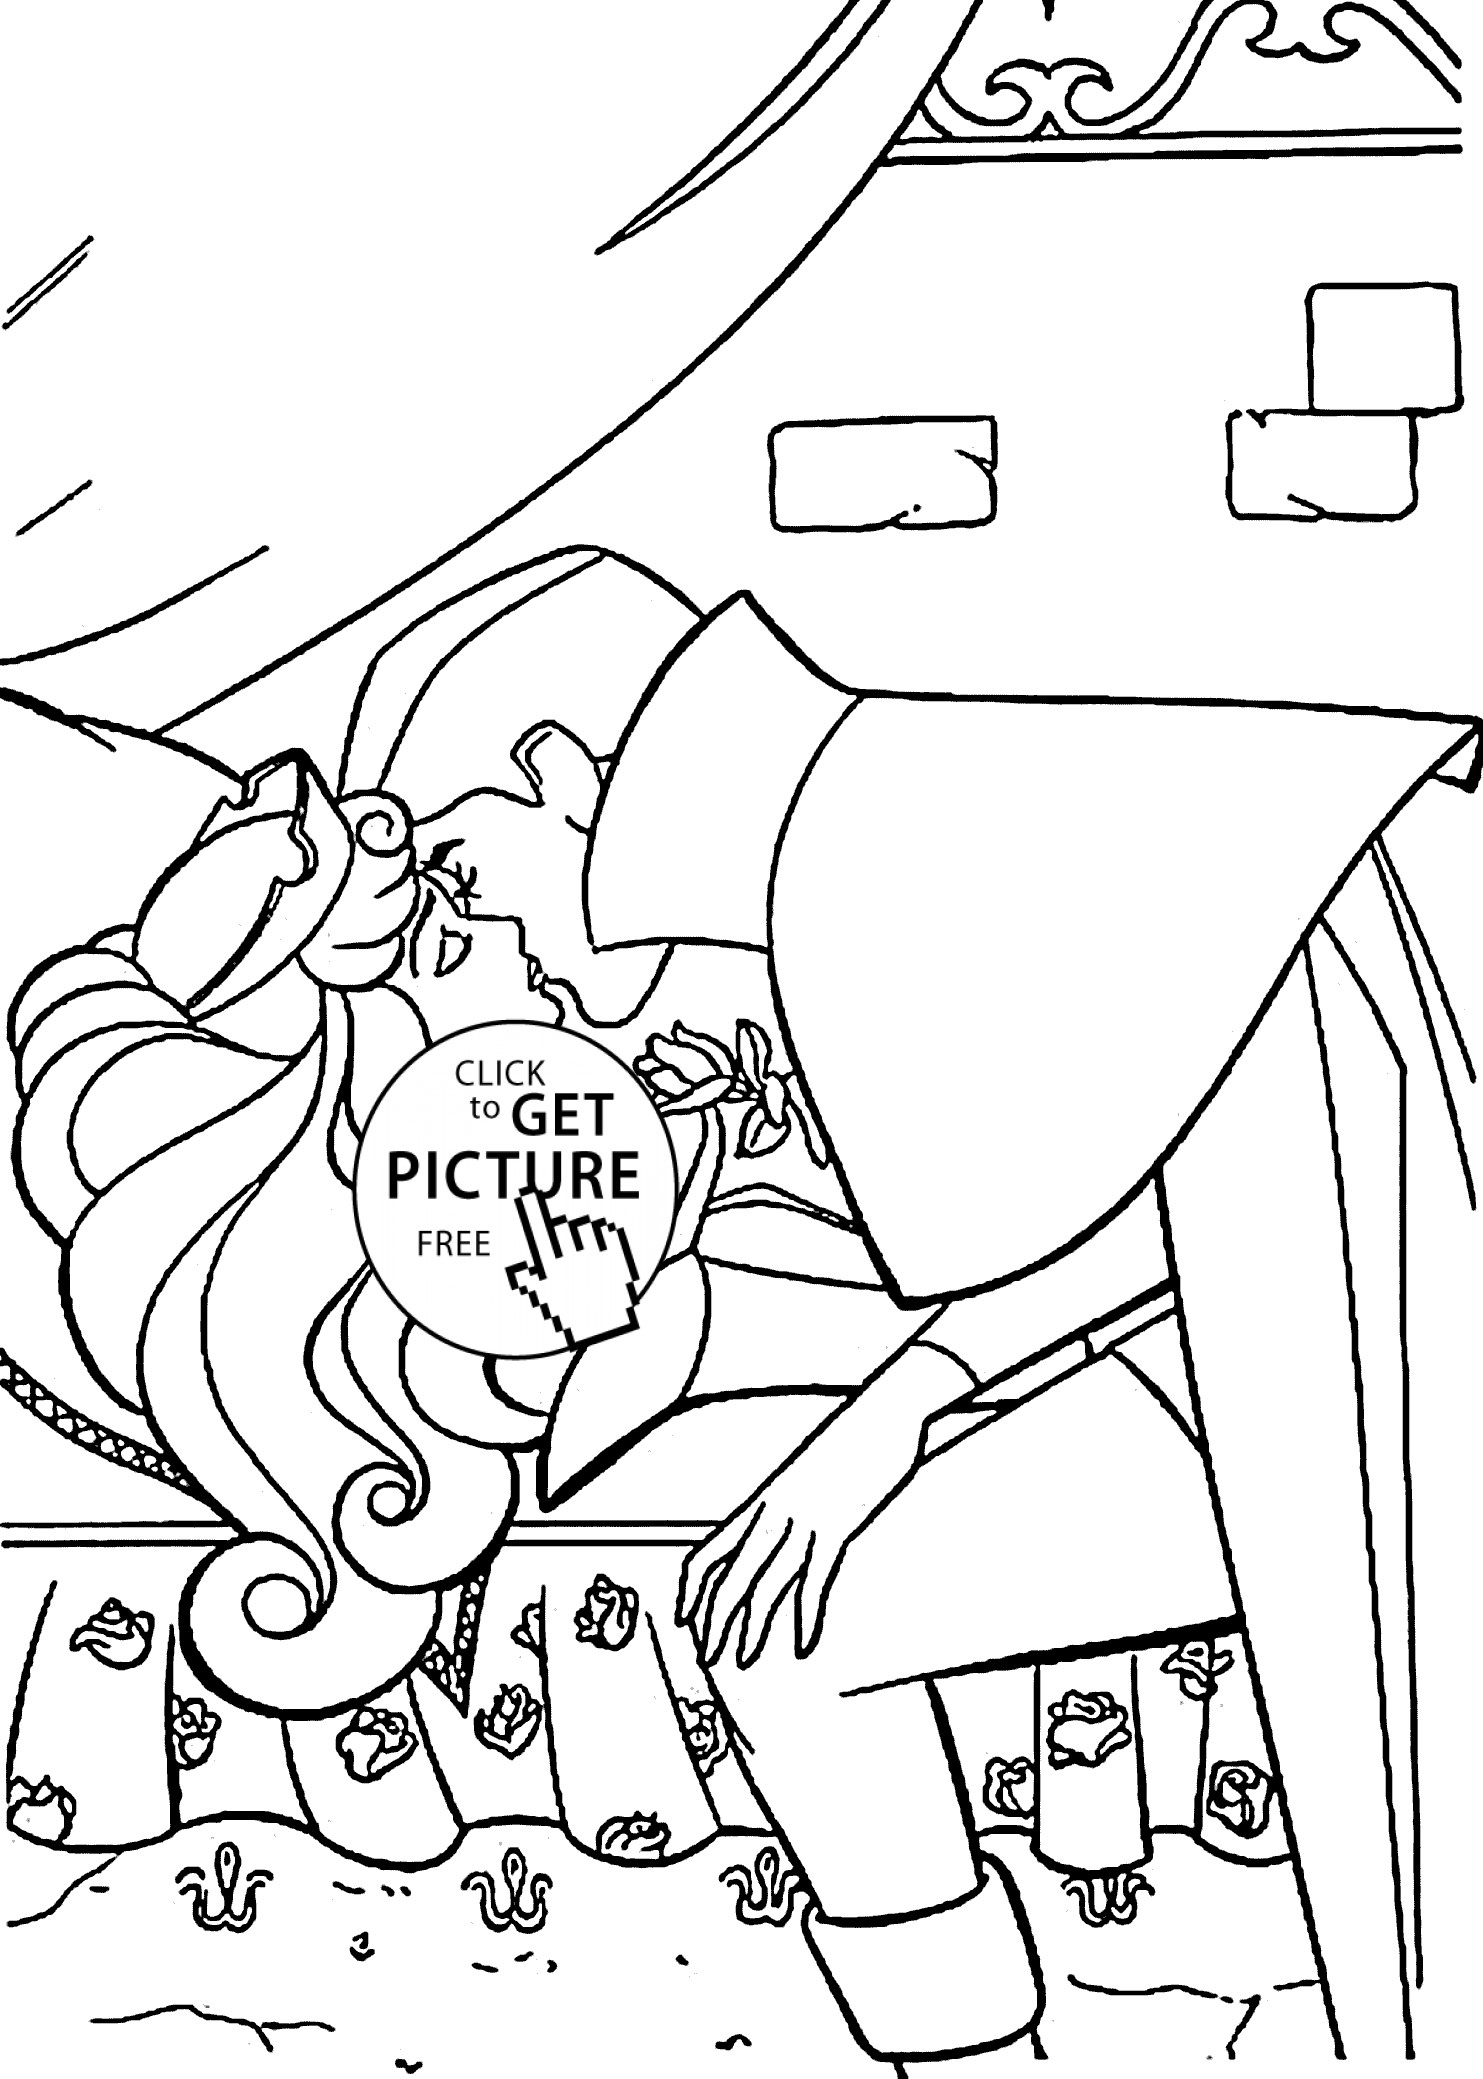 Sleeping Beauty Coloring Pages
 Sleeping Beauty Kiss coloring pages for kids printable free